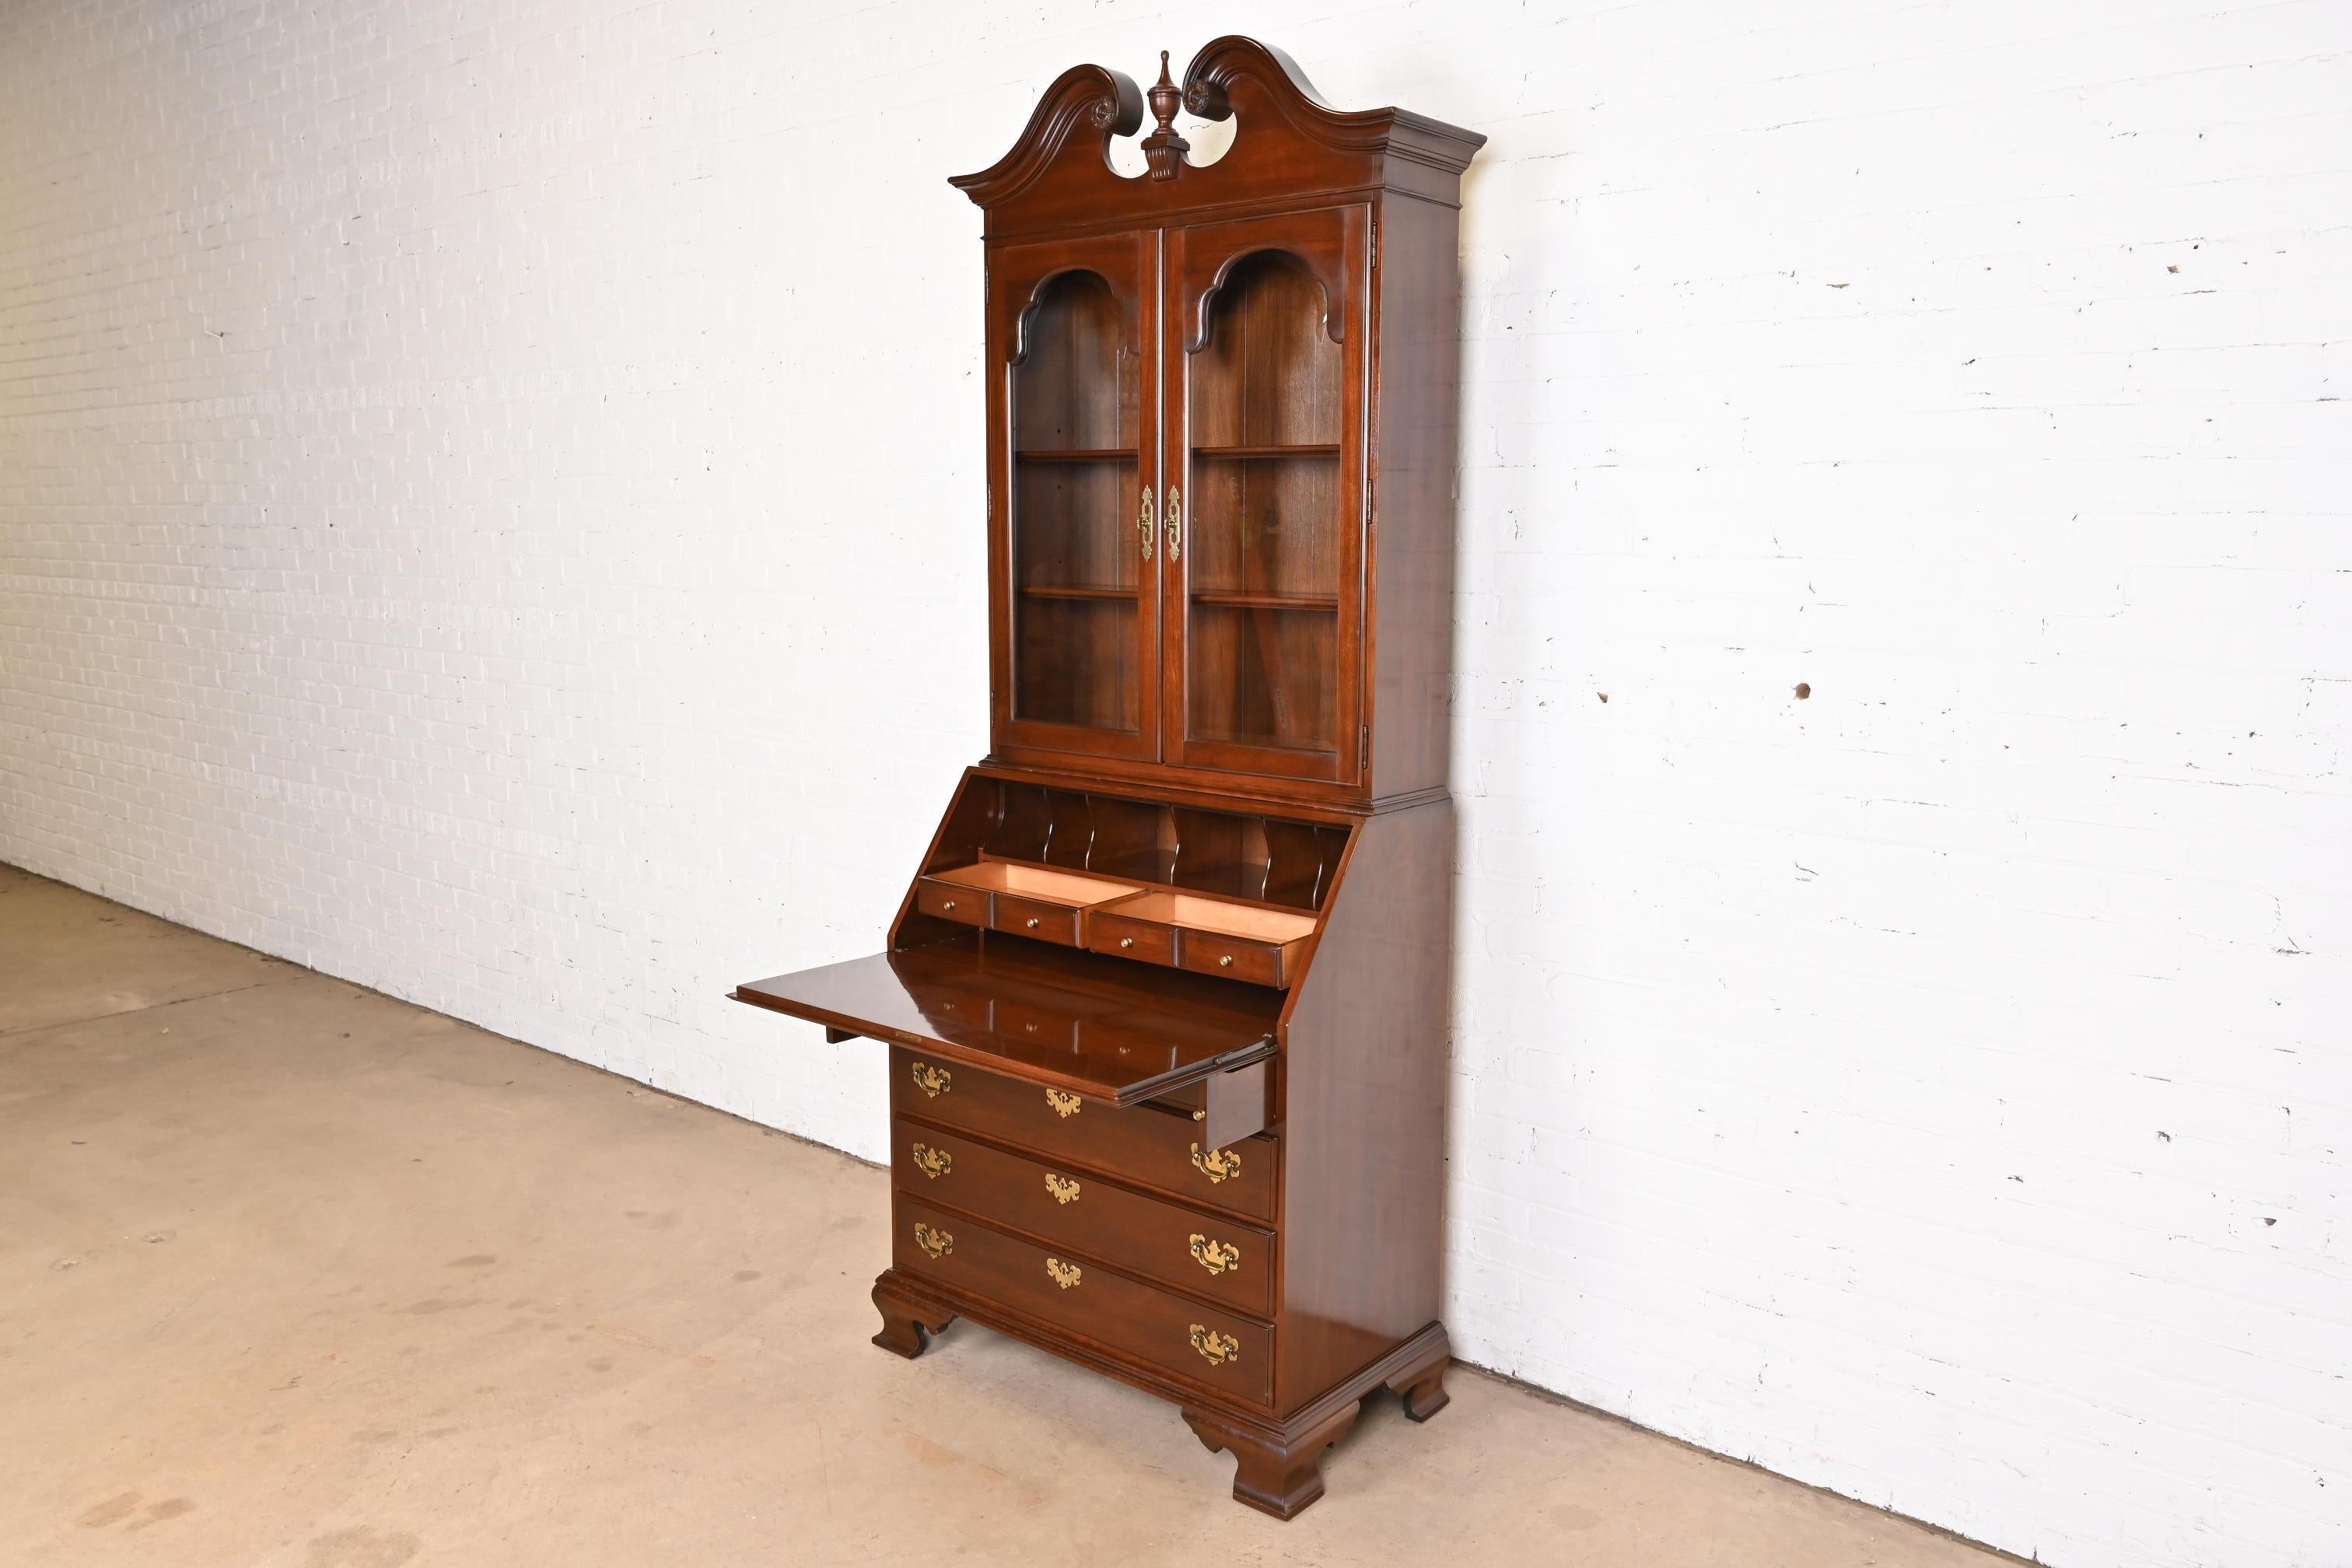 Georgian Cherry Wood Drop Front Secretary Desk With Bookcase Hutch In Good Condition For Sale In South Bend, IN